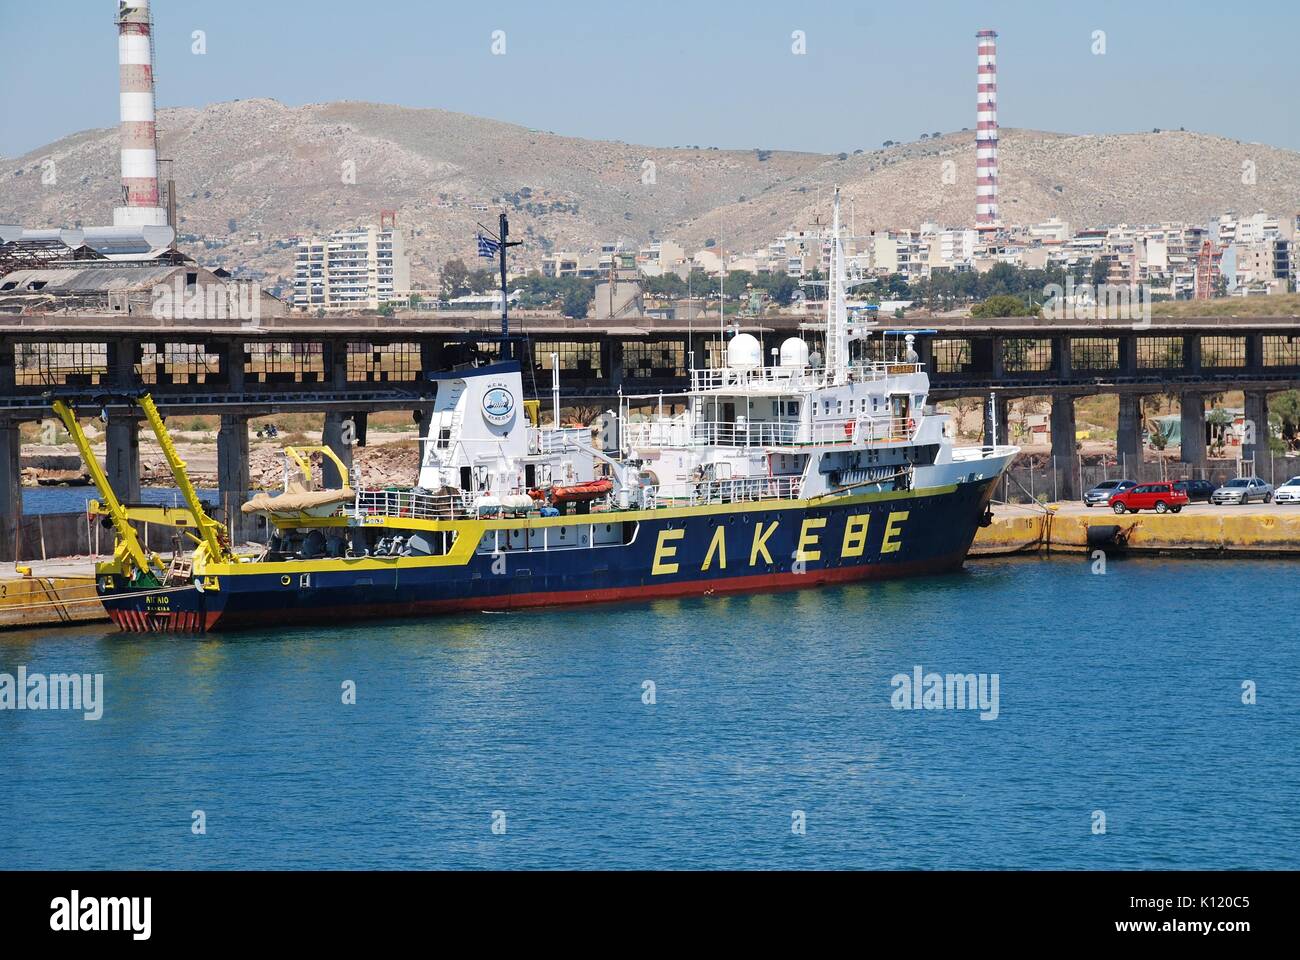 Aegaeo, marine research vessel of the Institute of Oceanography (part of the Hellenic Centre for Marine Research), moored in Piraeus port, Athens. Stock Photo